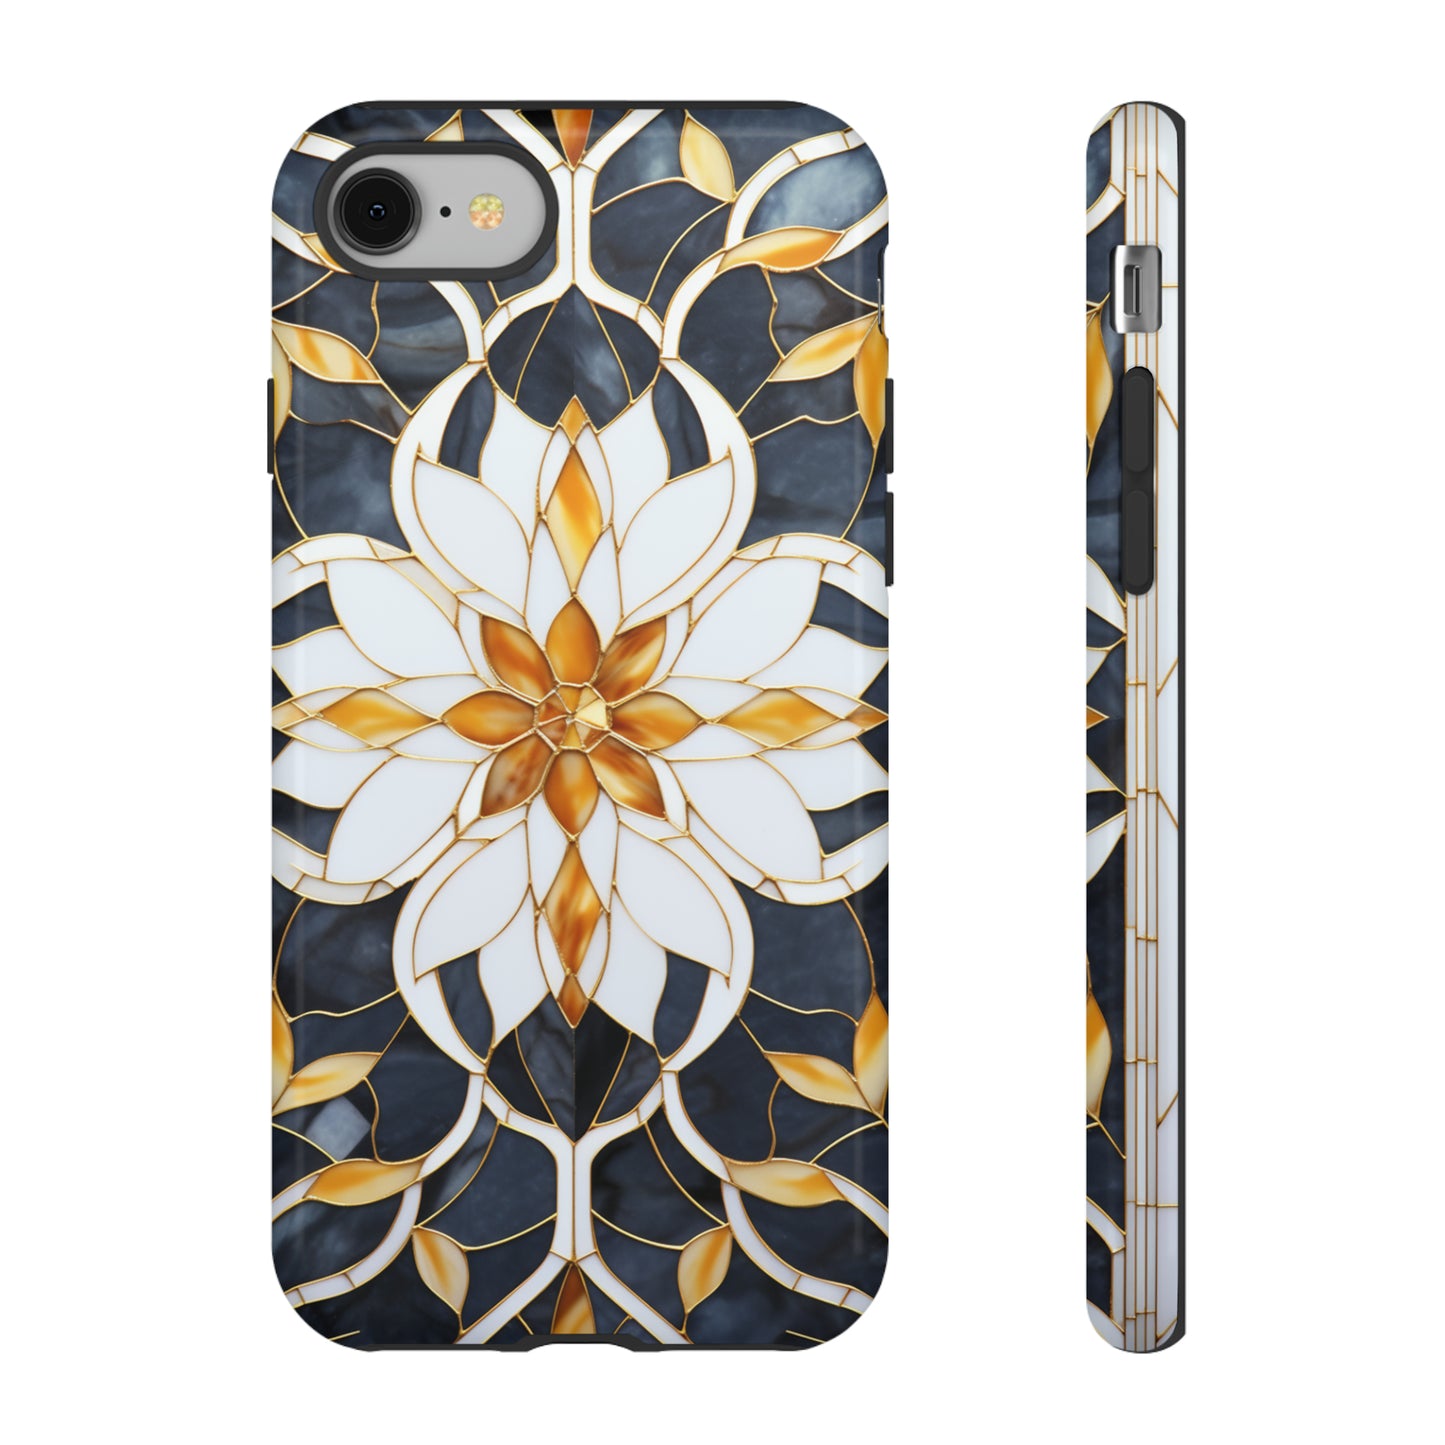 Opulent gold-accented case for iPhone XS Max